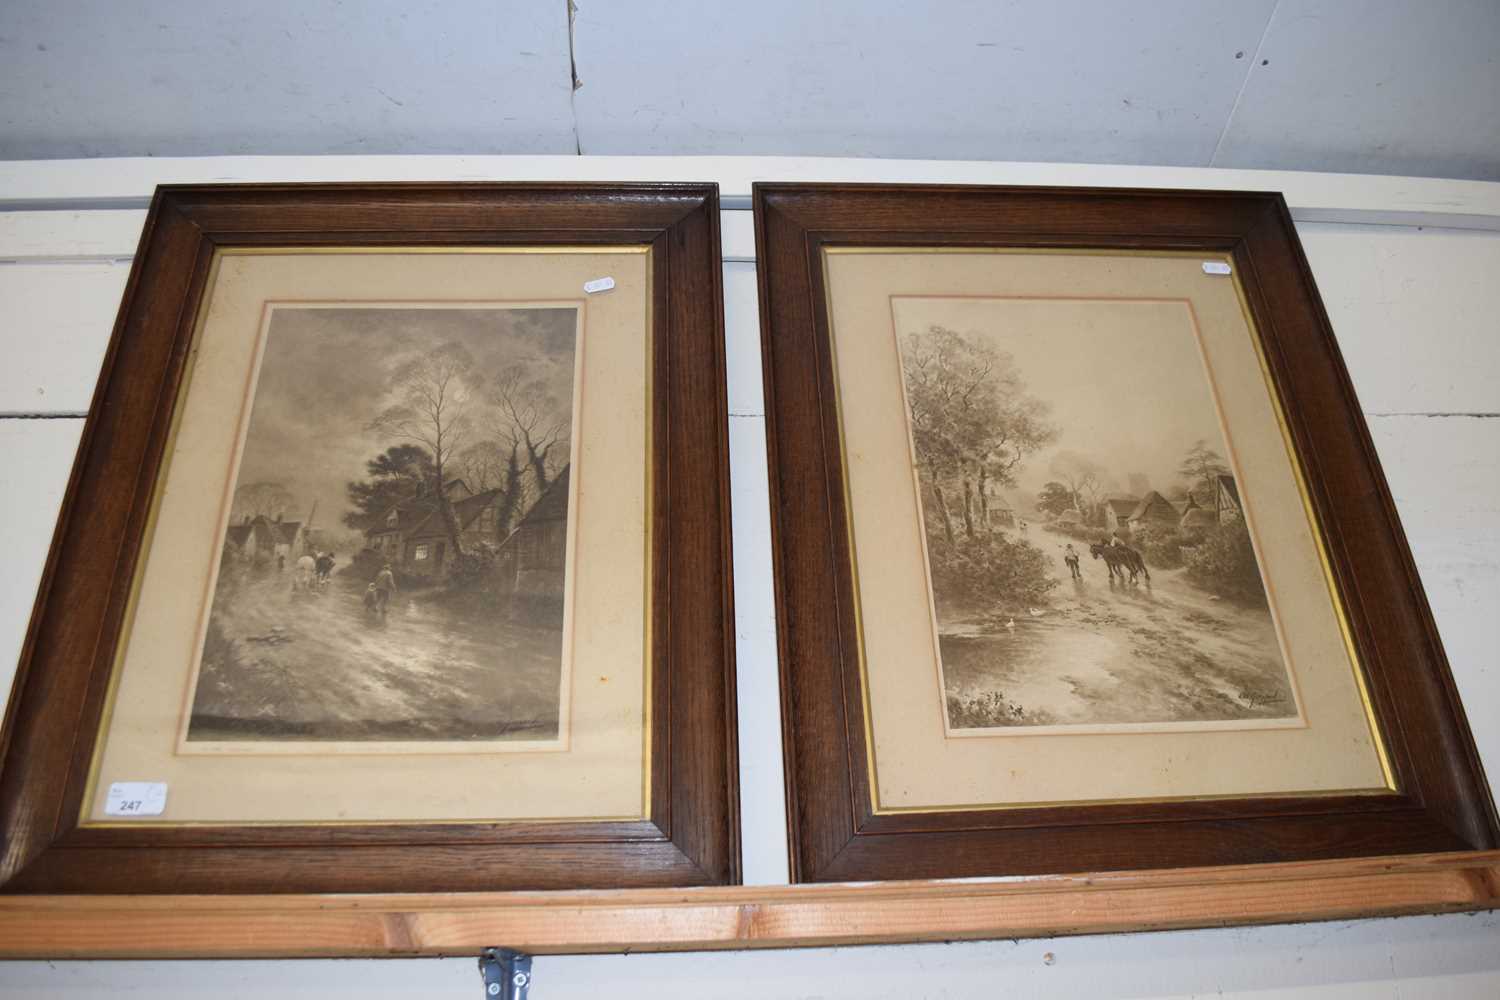 AFTER GAZZARD, PAIR OF SEPIA PRINTS, OAK FRAMED AND GLAZED